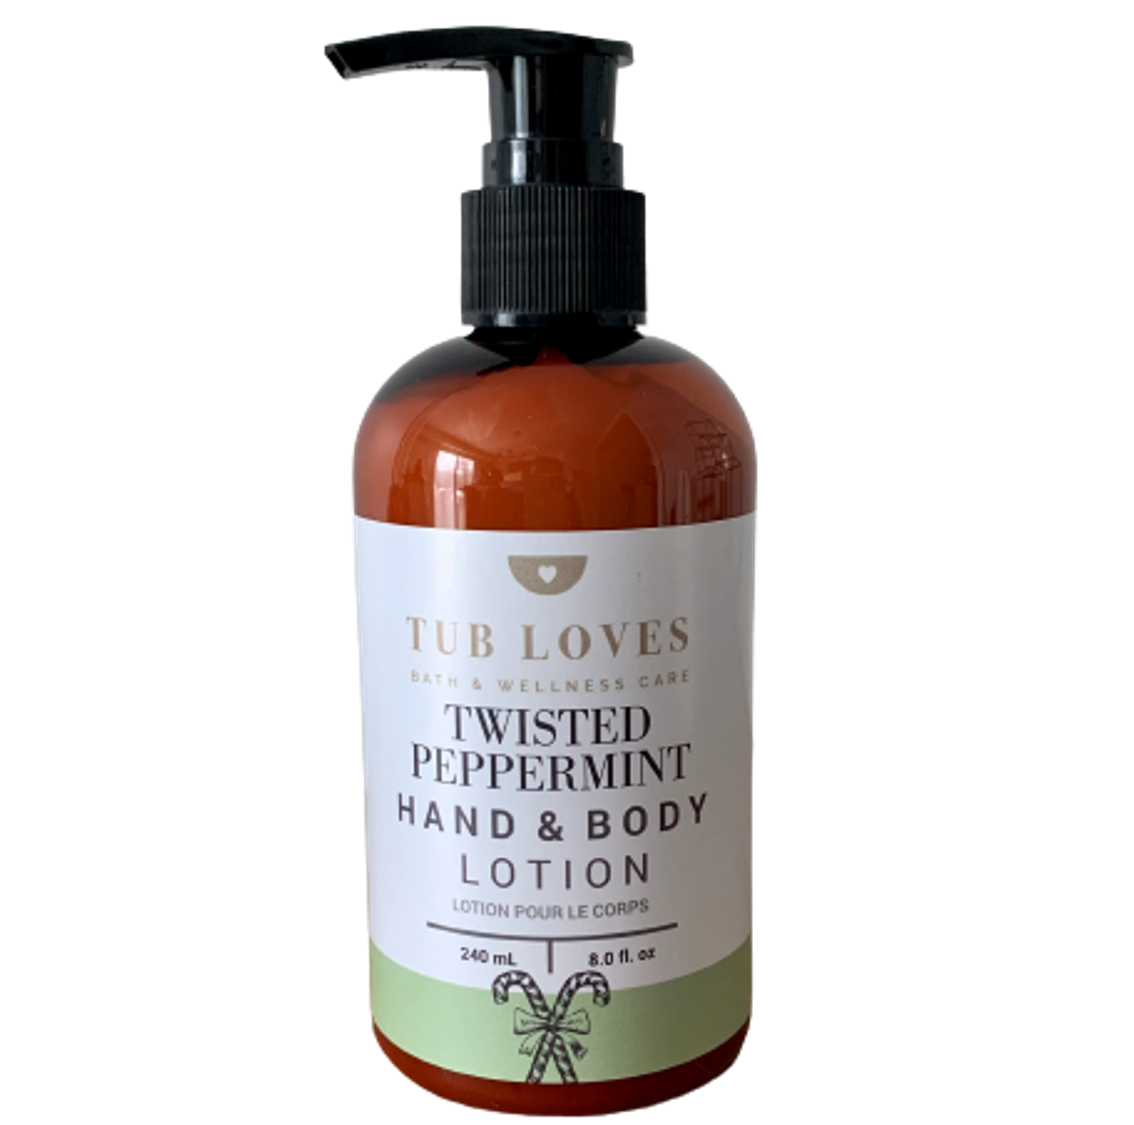 Twisted Peppermint - Hand & Body Lotion